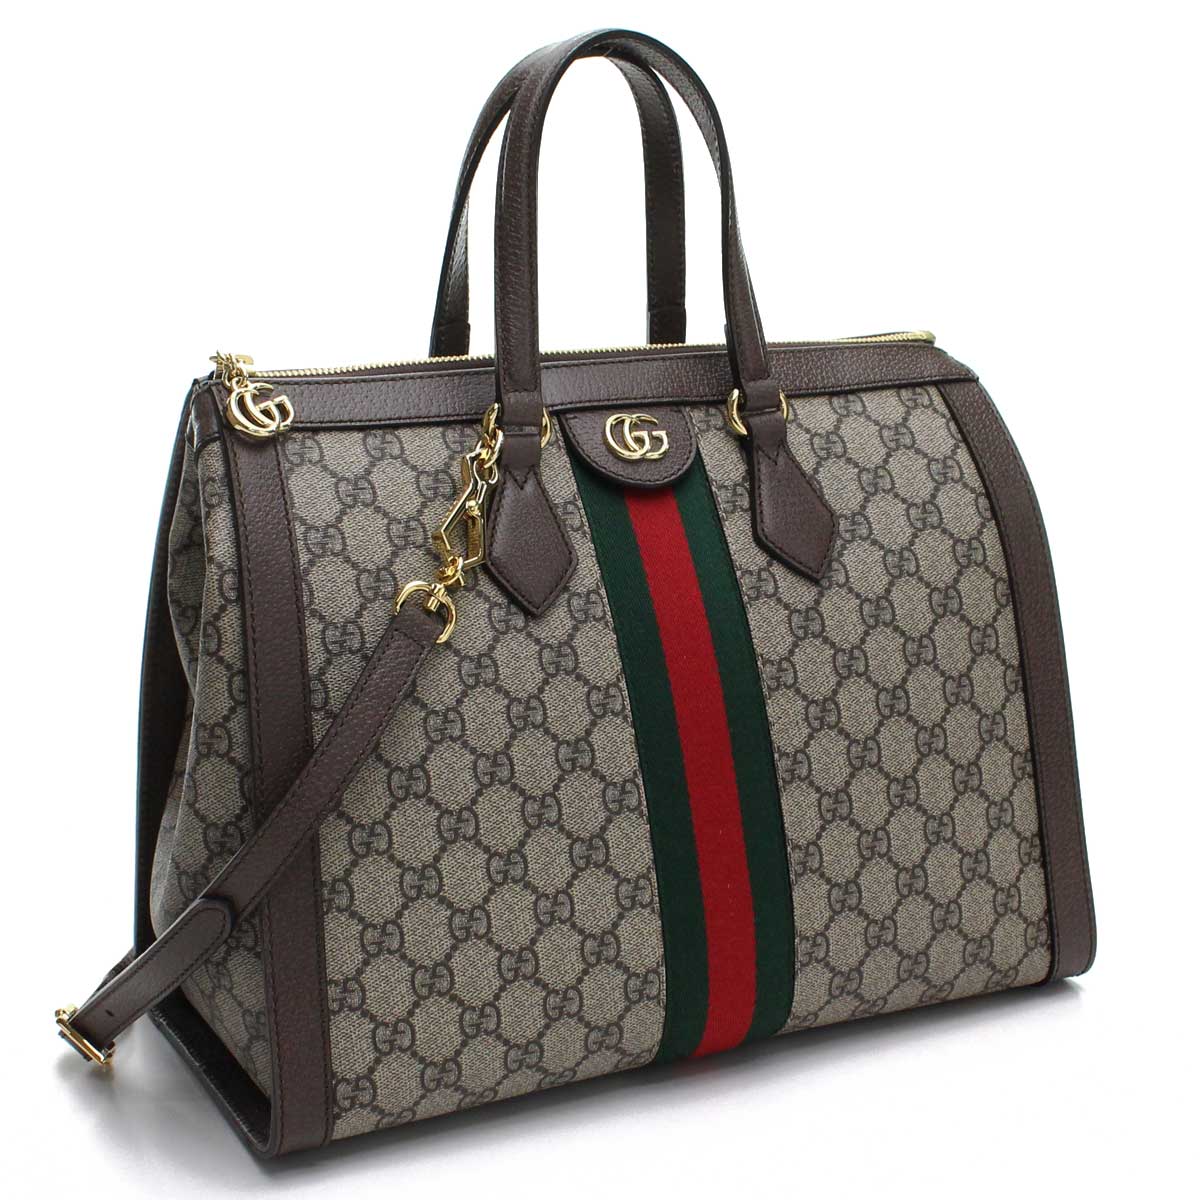 Bighit The total brand wholesale: Gucci GUCCI 2way tote bag 524537 K05NB 8745 beige system Lady ...